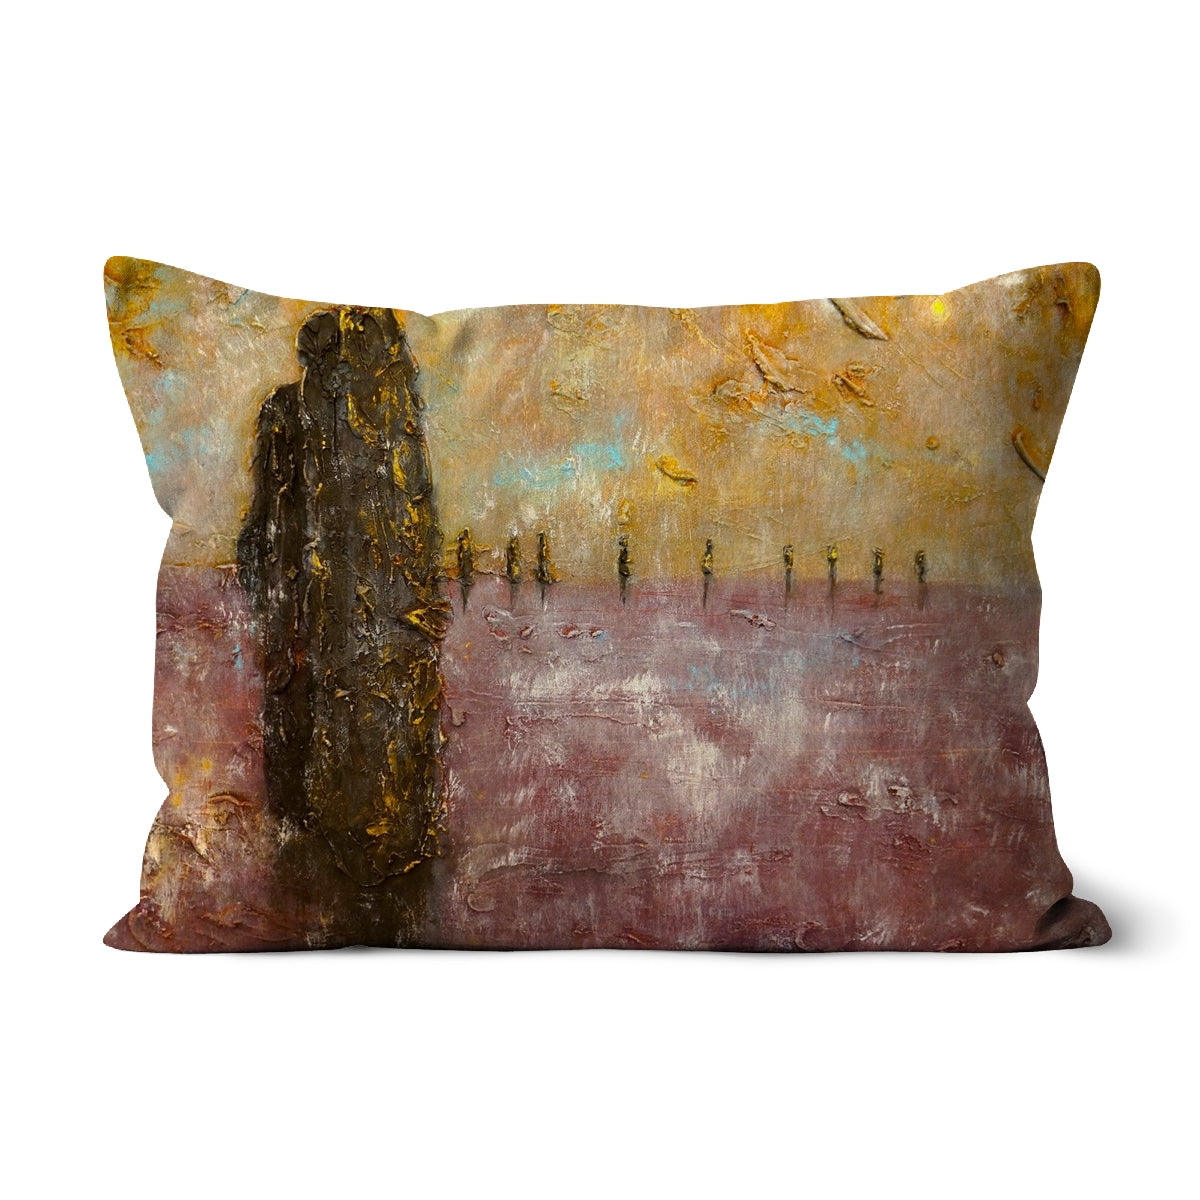 Bordgar Mist Orkney Art Gifts Cushion-Cushions-Orkney Art Gallery-Linen-19"x13"-Paintings, Prints, Homeware, Art Gifts From Scotland By Scottish Artist Kevin Hunter